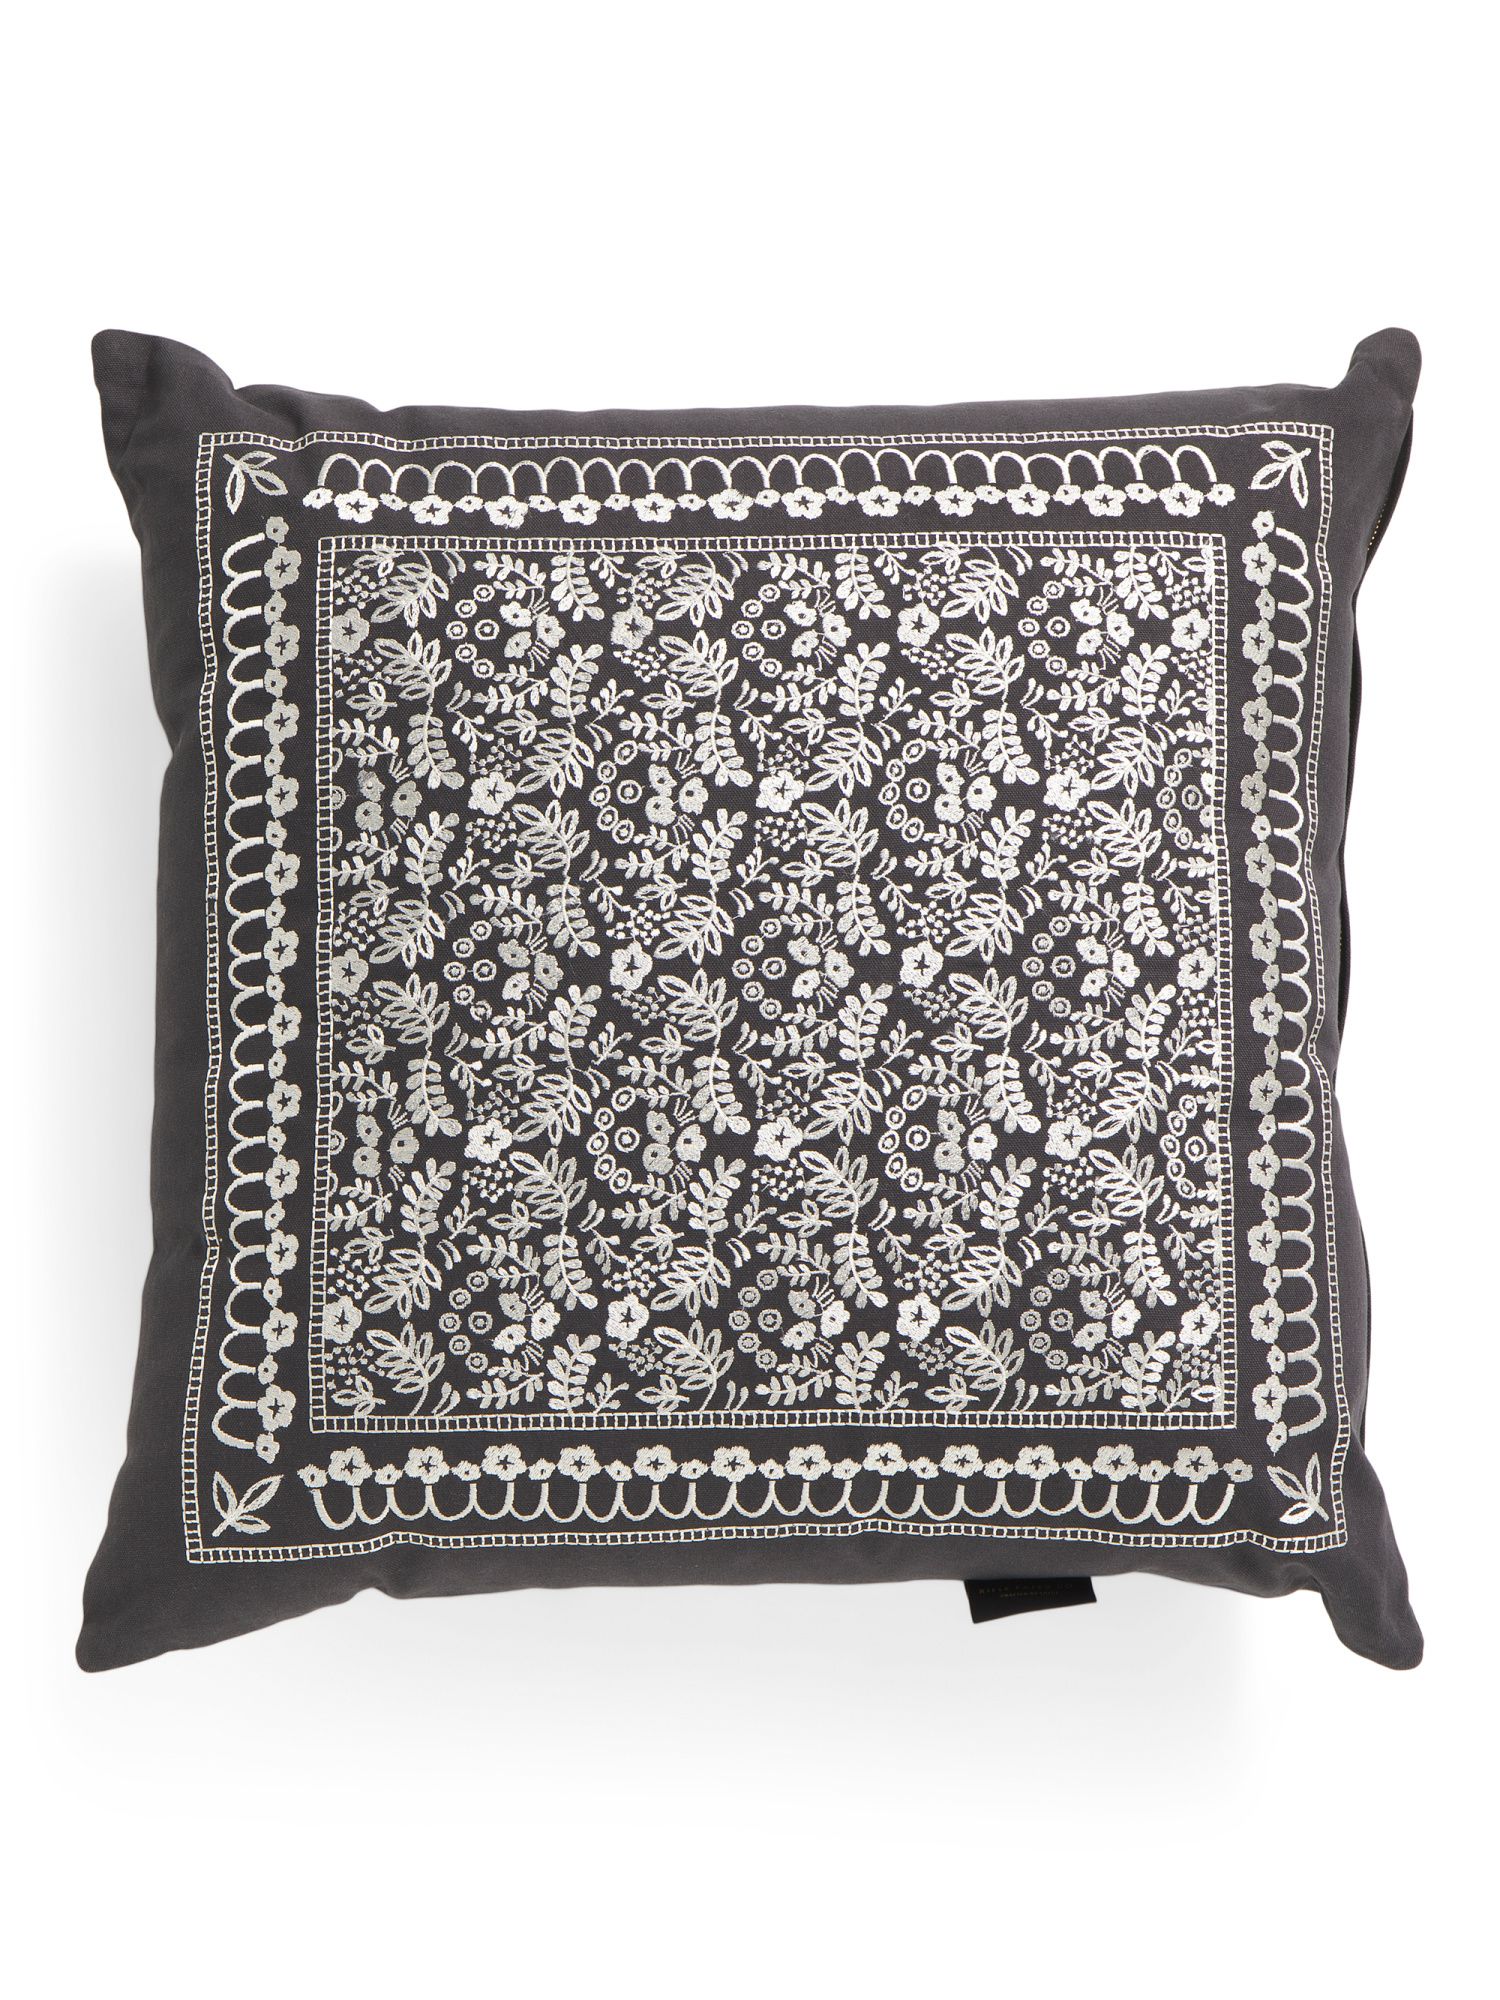 22x22 Patterned Pillow | Marshalls